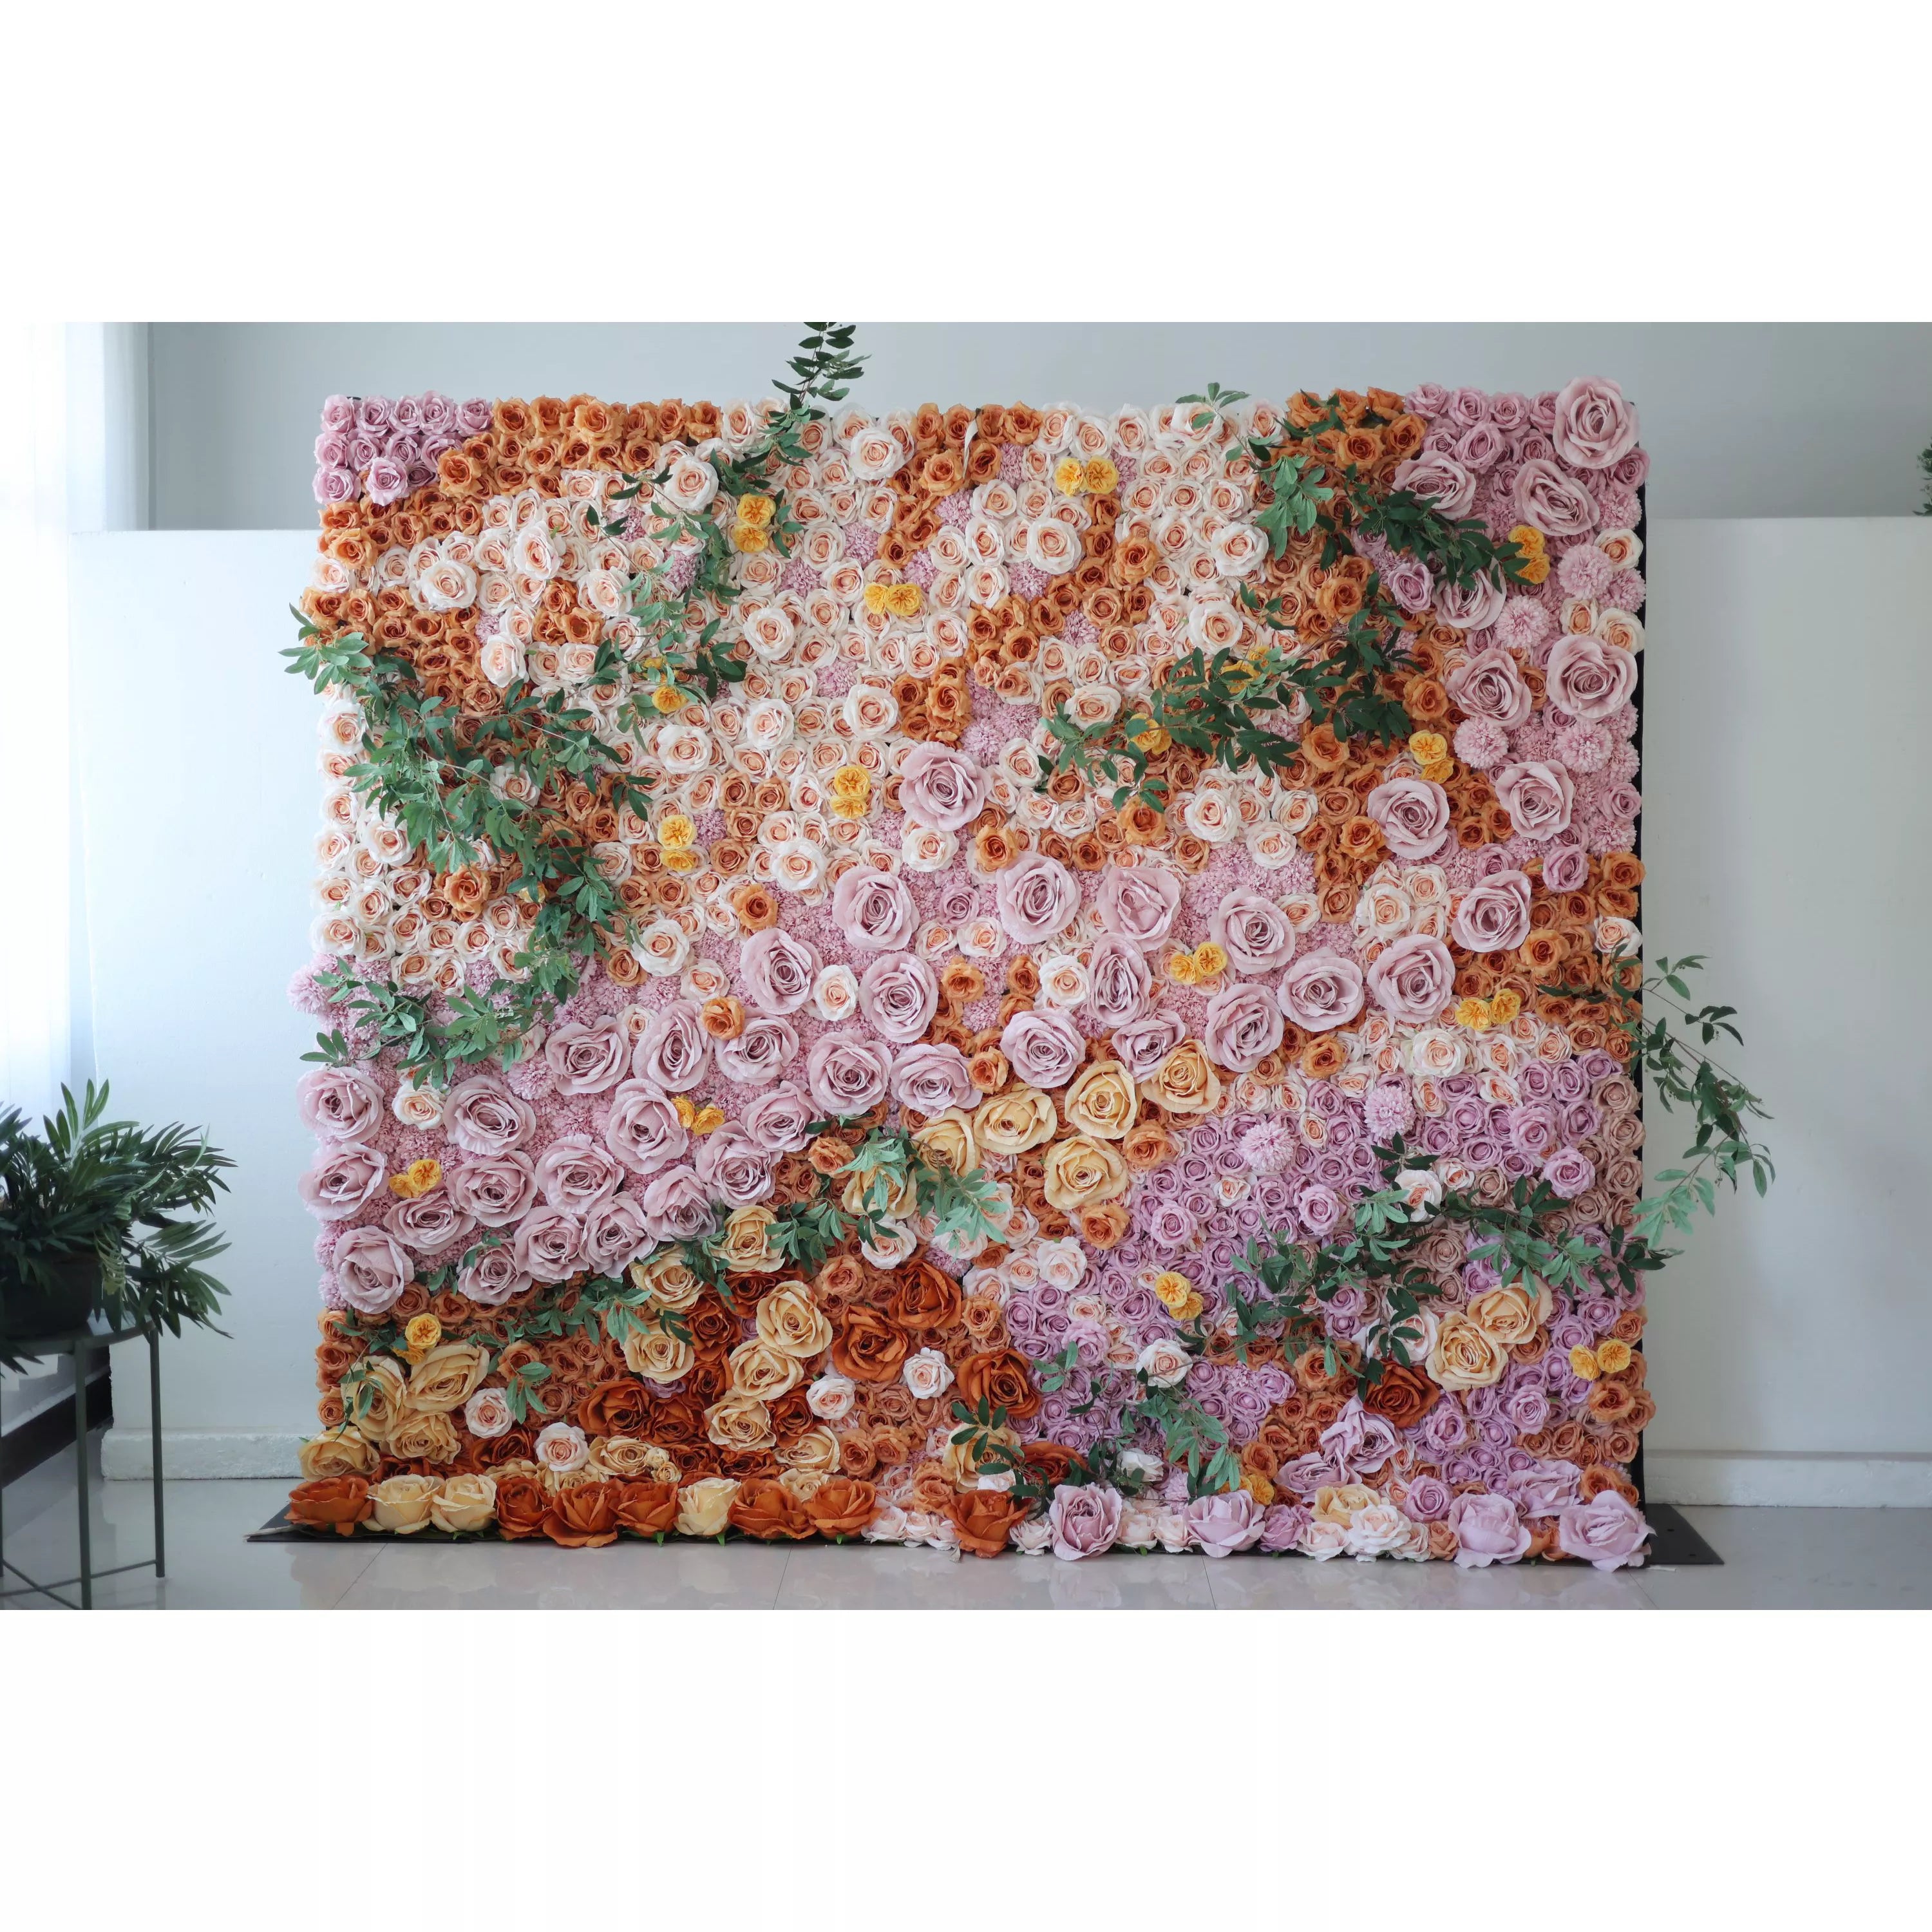 Enhance your space with our lush pink floral wall, boasting a rich blend of roses in warm hues. Ideal for spa settings or events, it offers a touch of elegance and nature-inspired tranquility. A must-have backdrop for any luxurious setting.